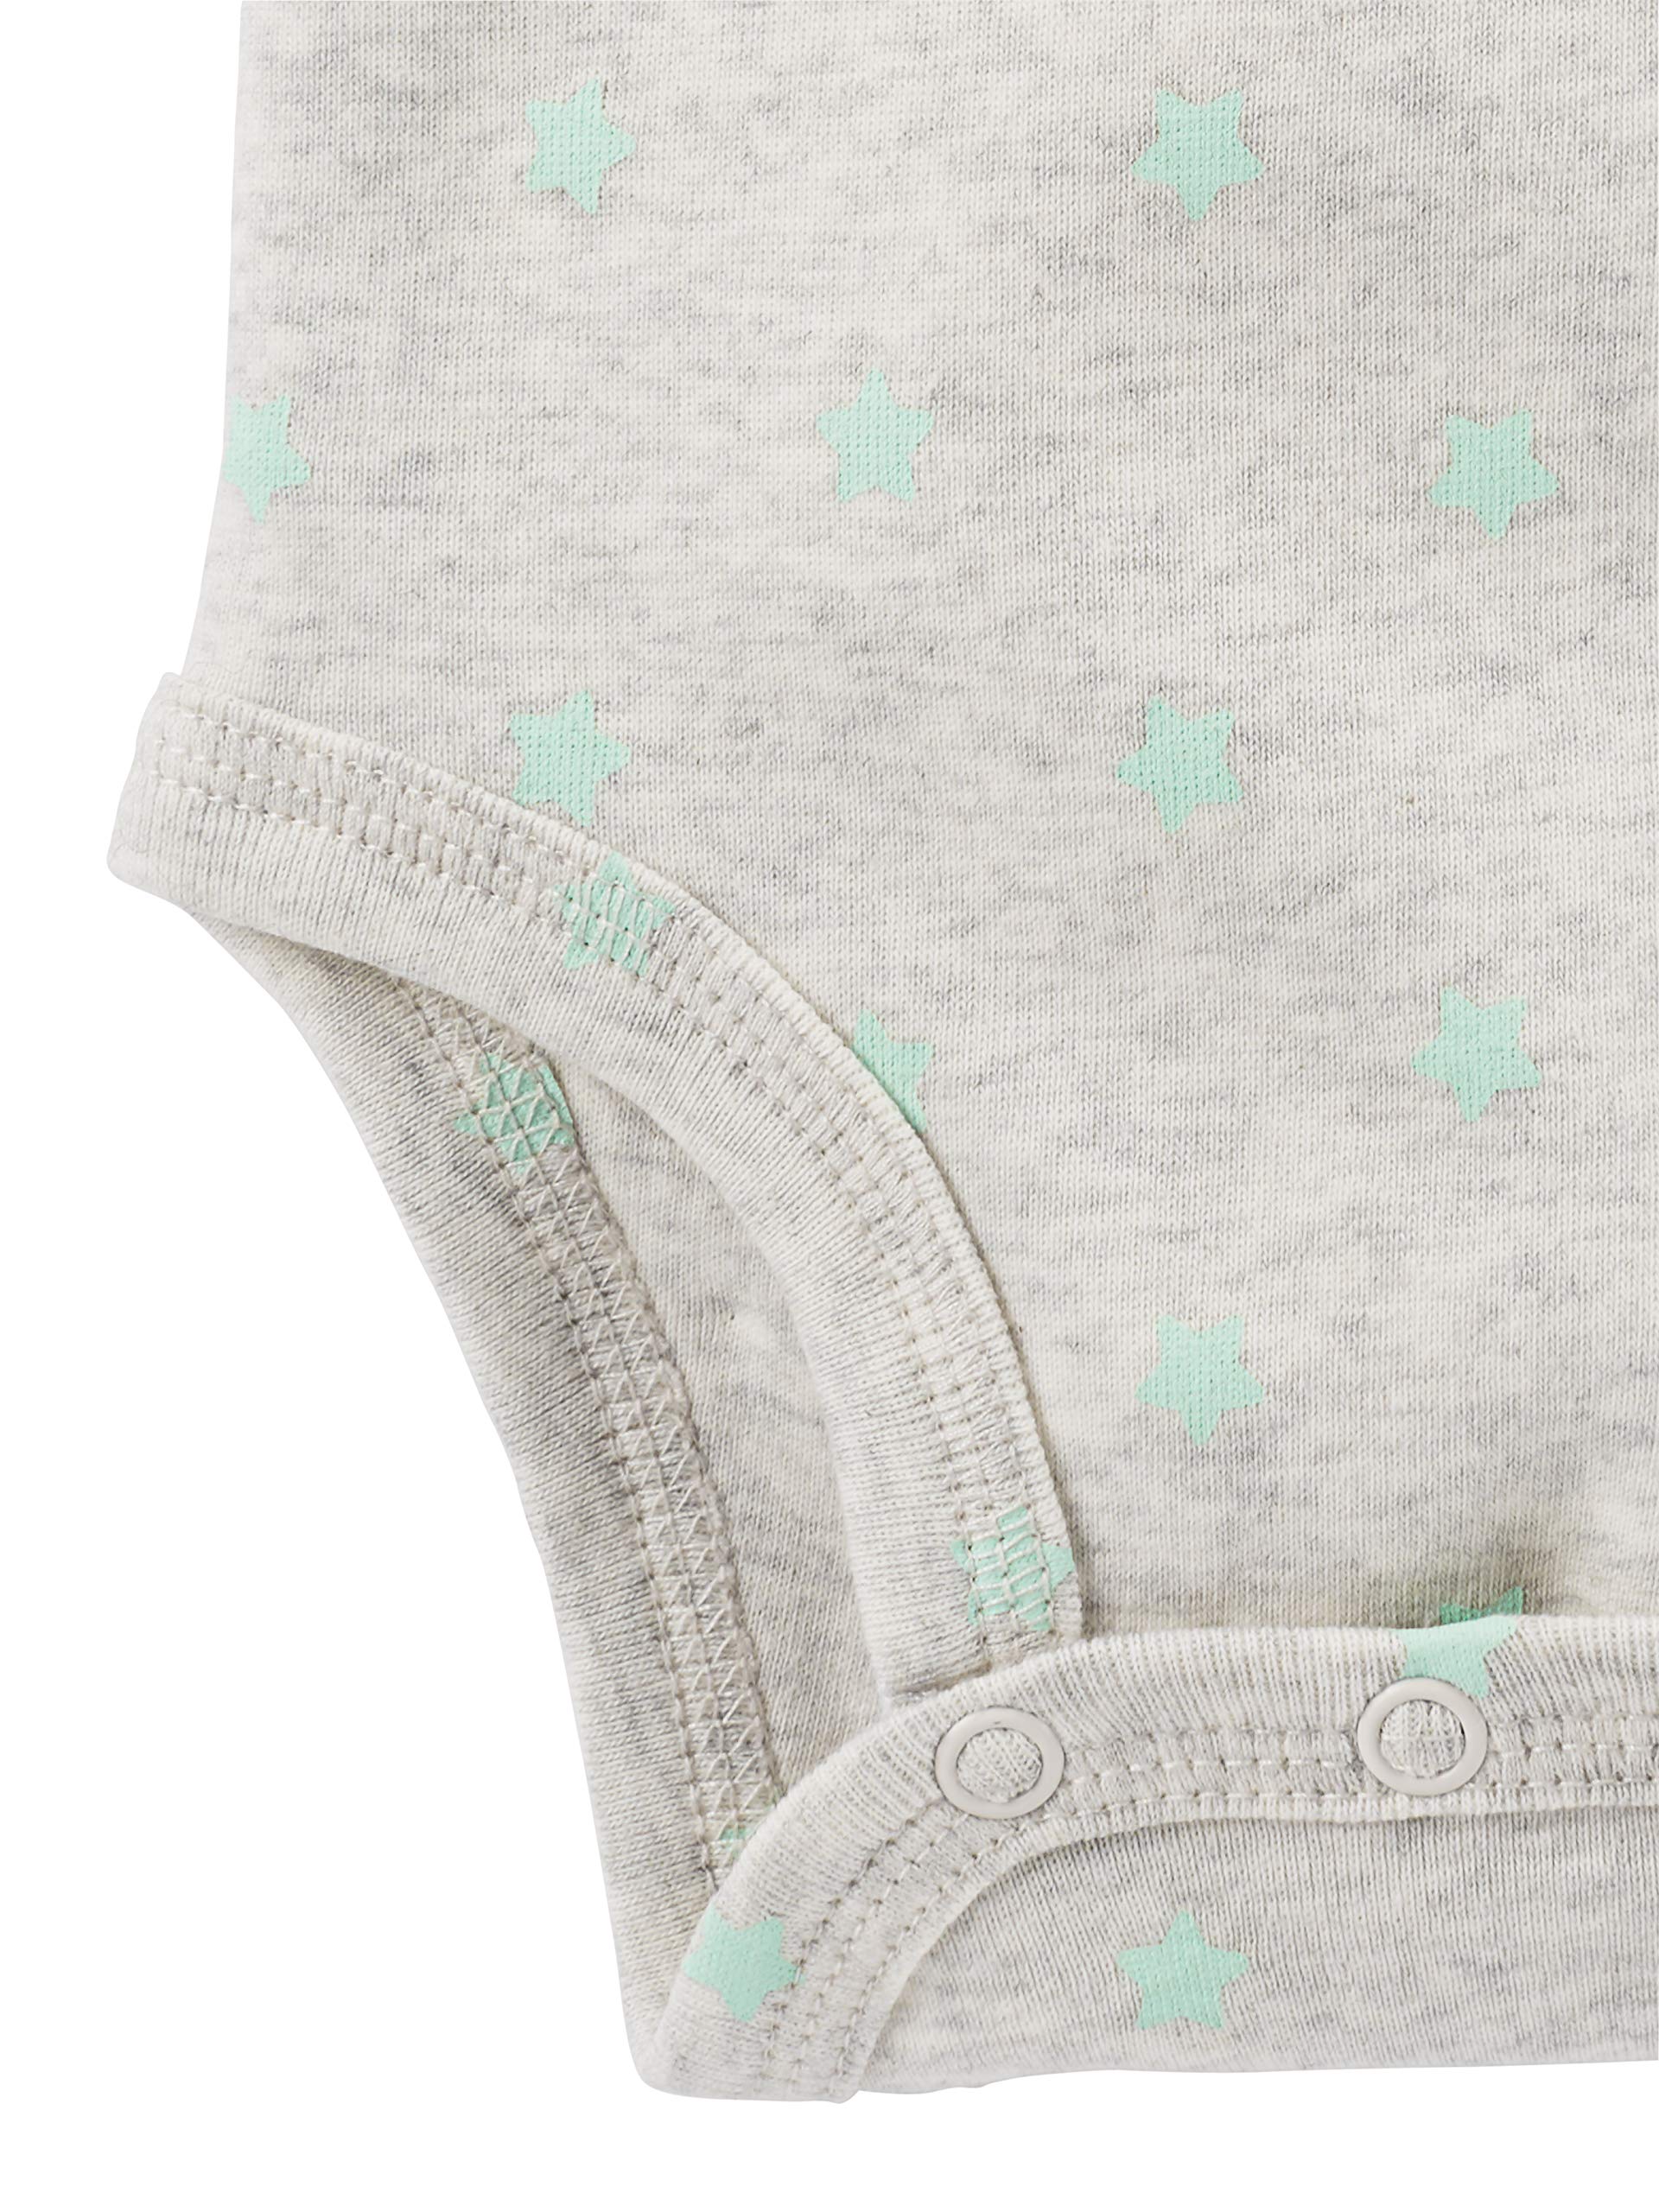 Simple Joys by Carter's Unisex Babies' 6-Piece Bodysuits (Short and Long Sleeve) and Pants Set